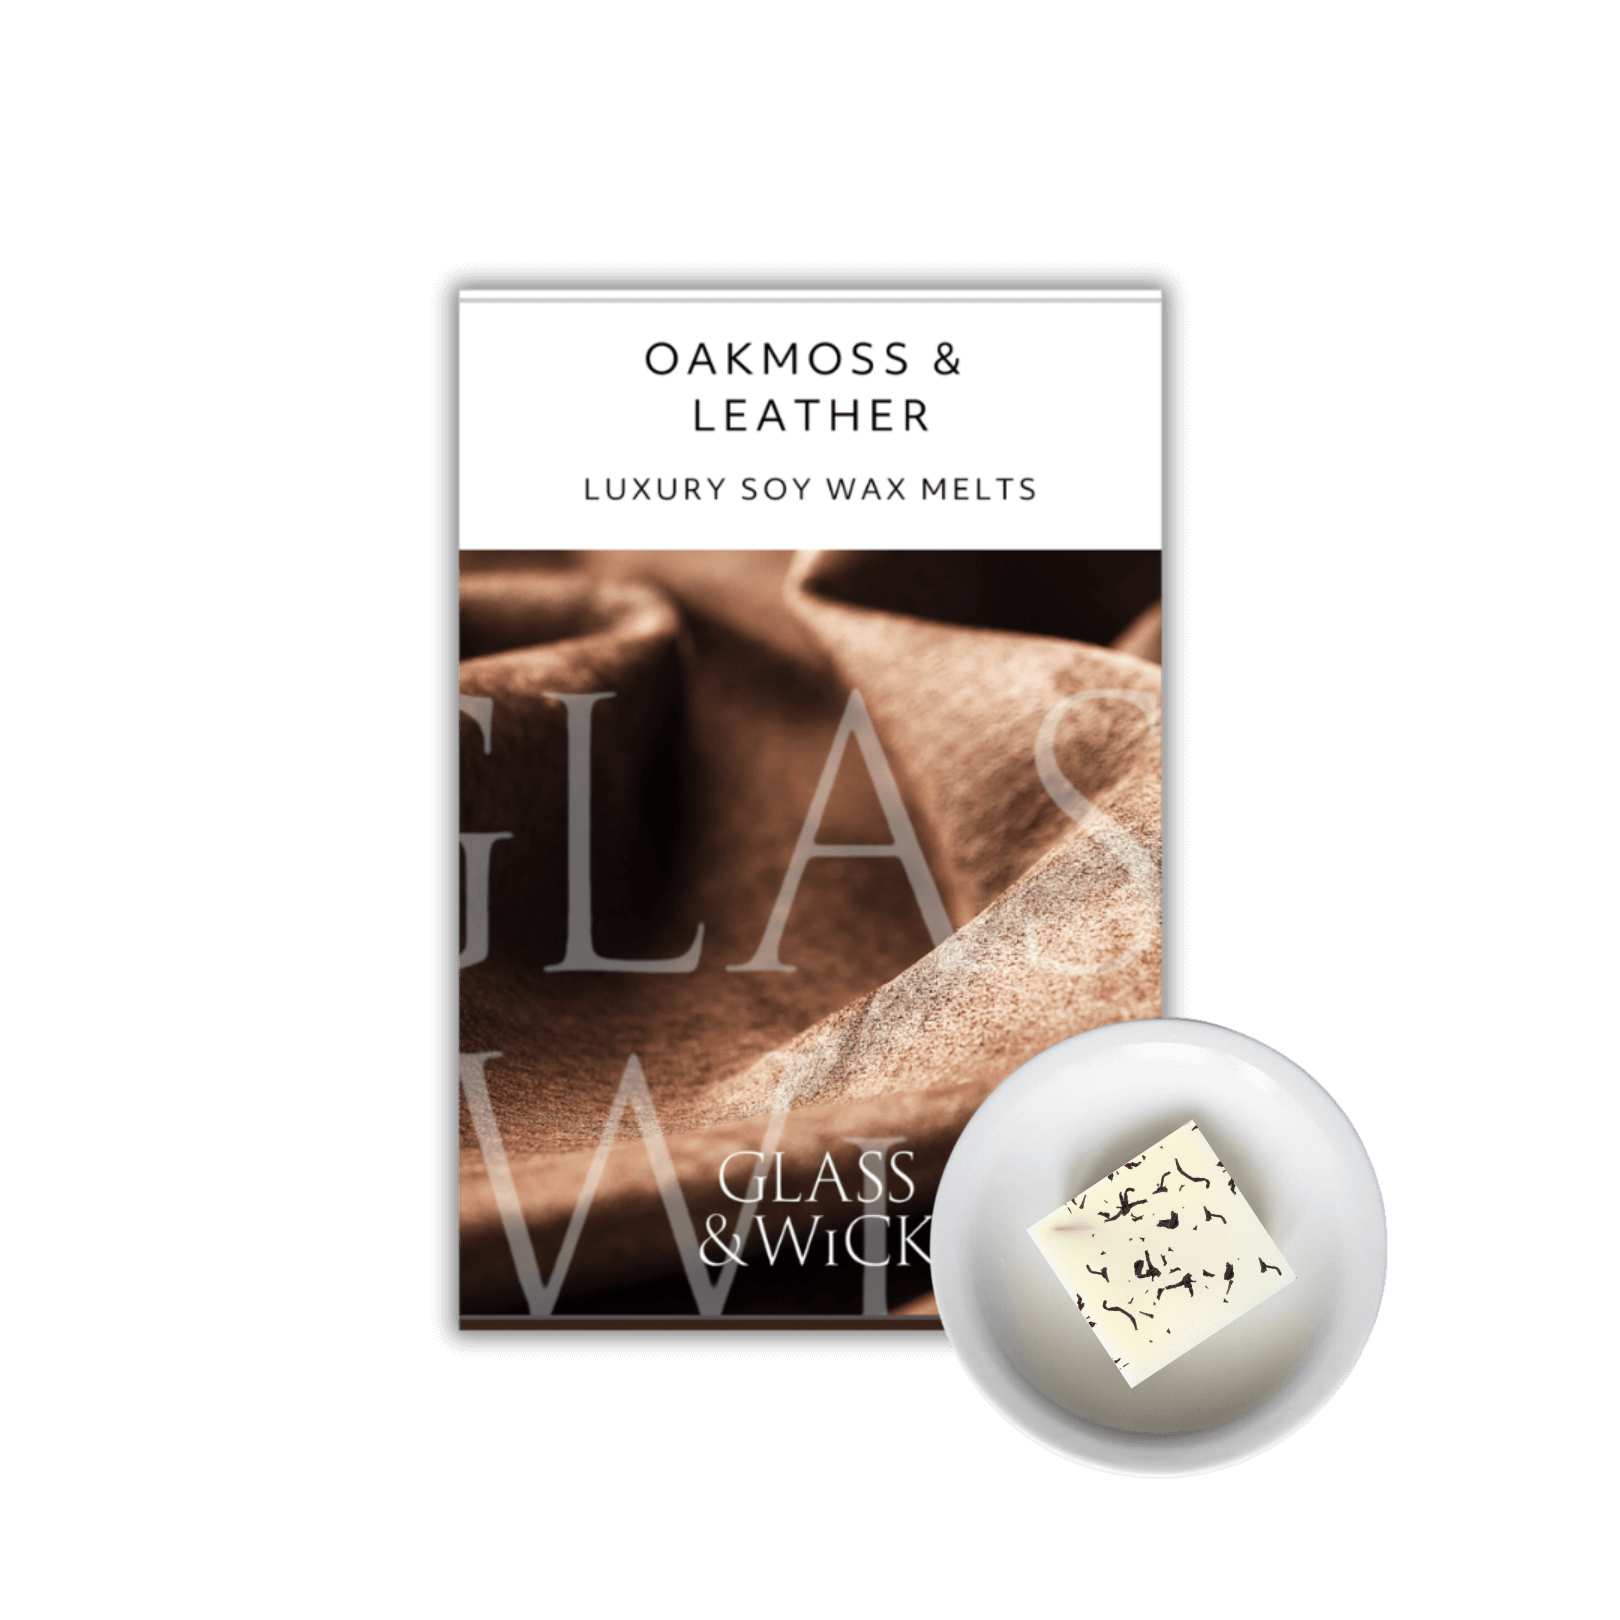 masculine scented leather soy wax melts